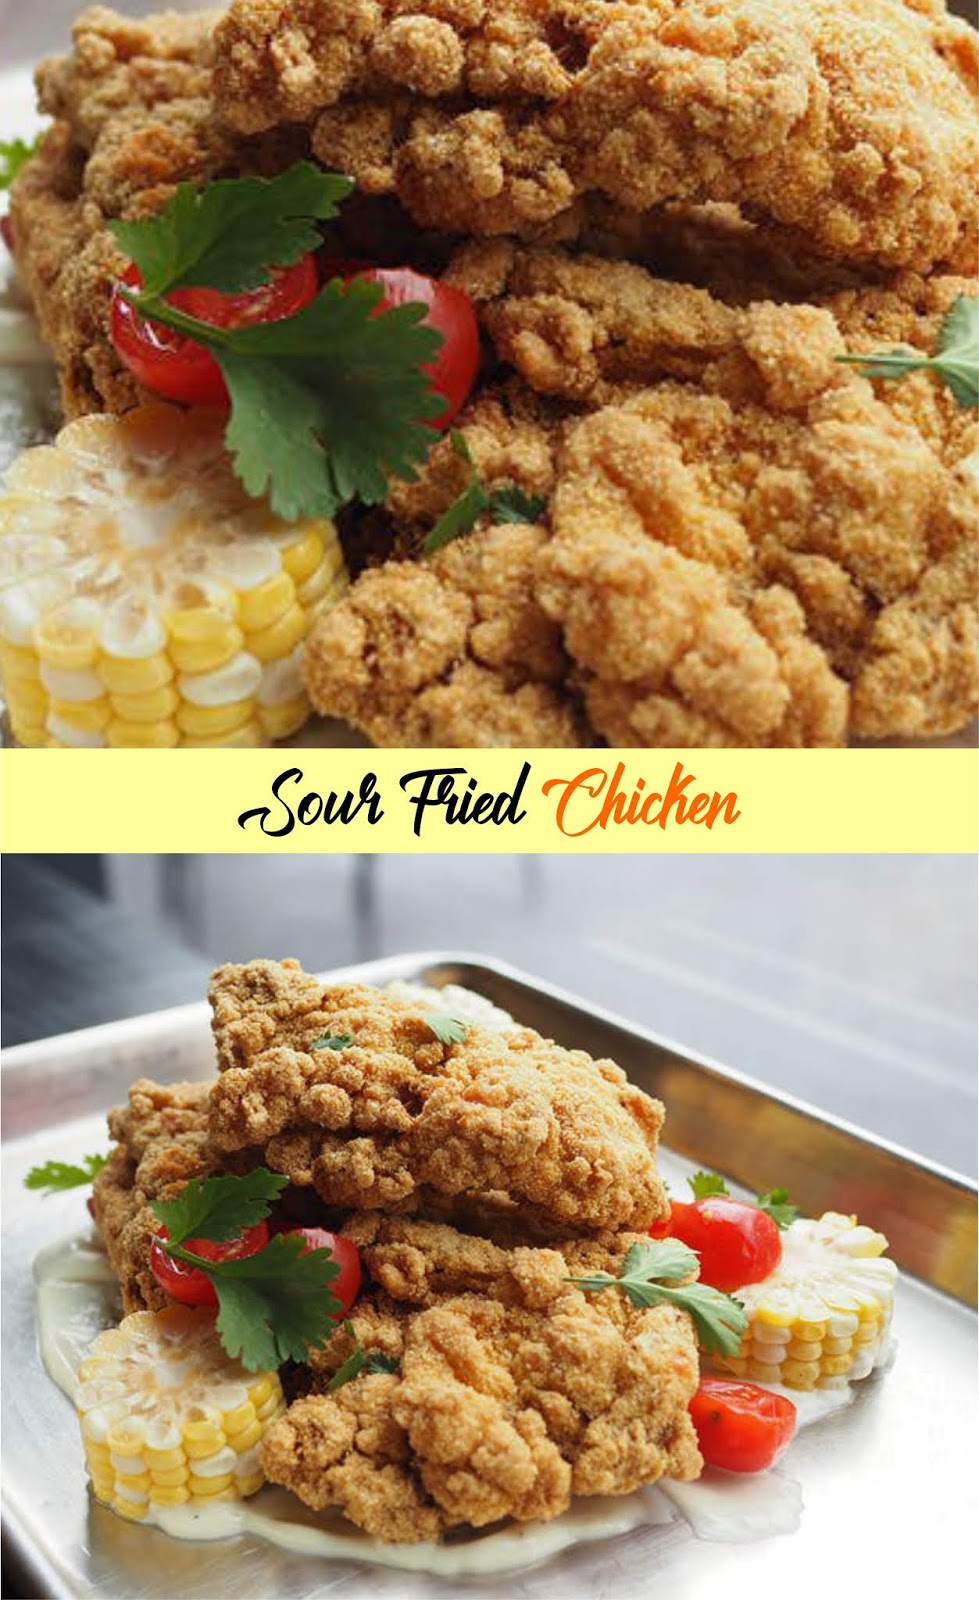 Sour Fried Chicken | EAT